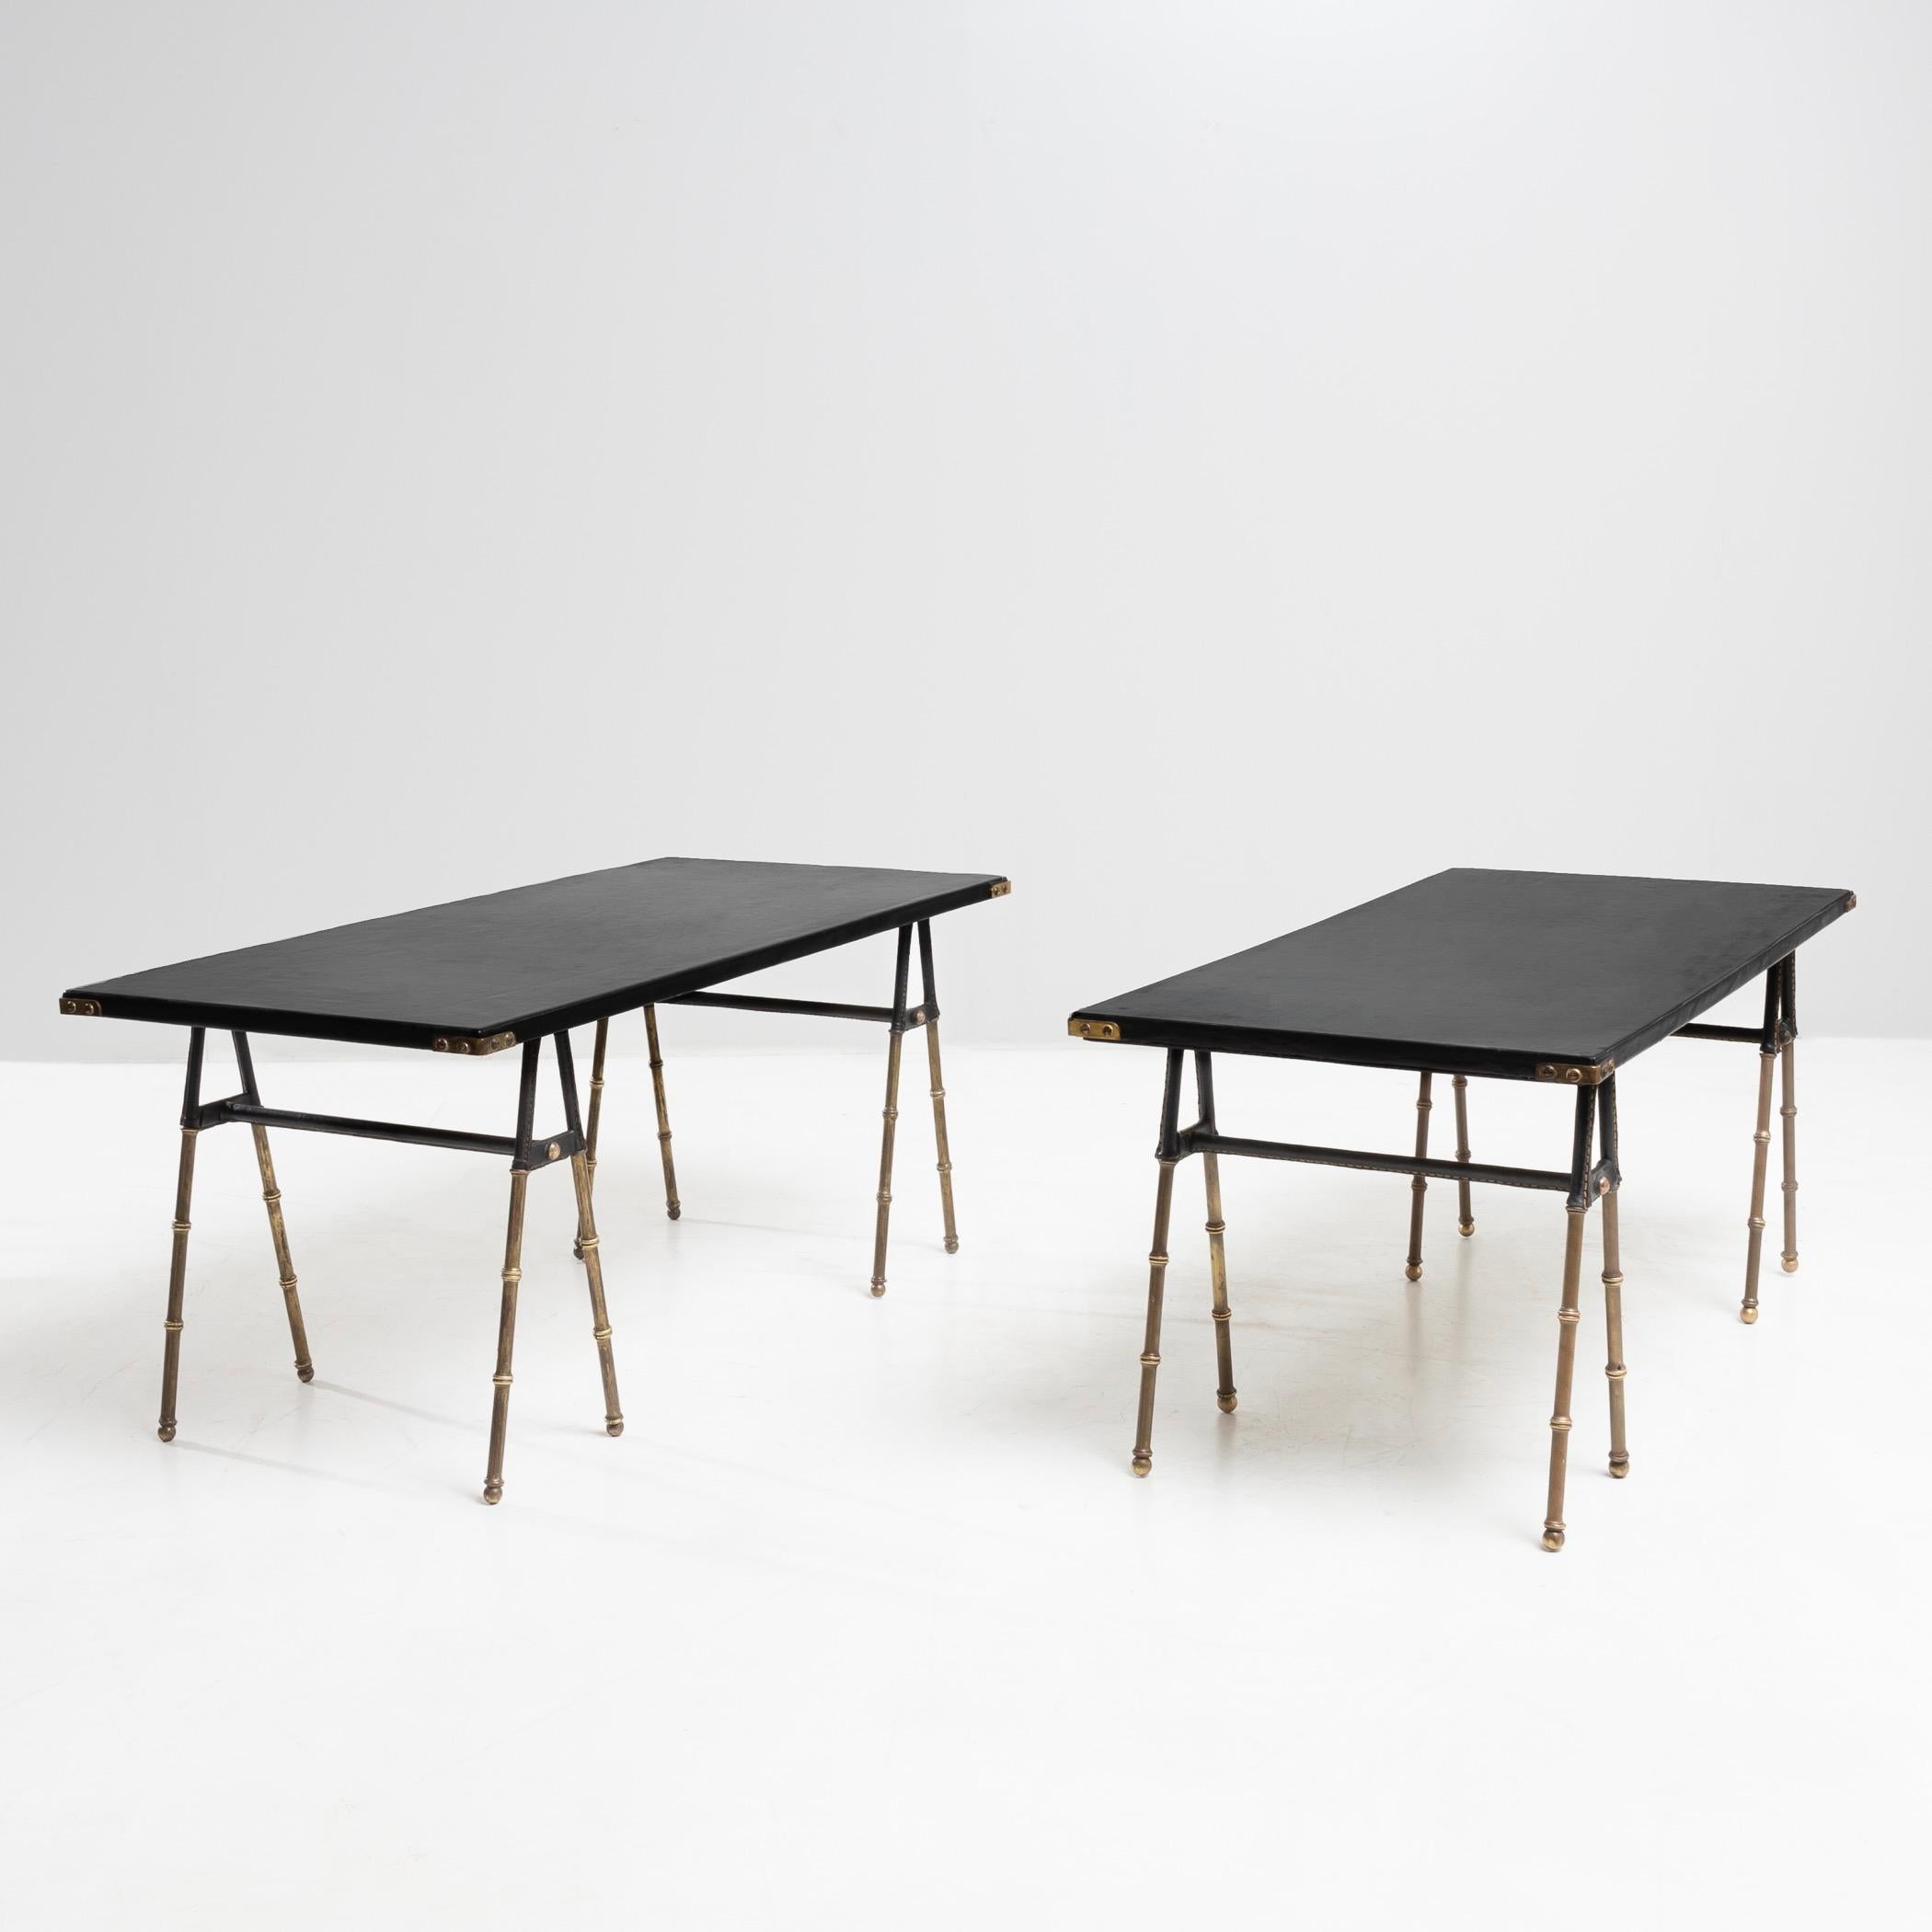 Elegant pair of coffee tables by Jacques Adnet with tops entirely covered in black leather, bronze corner protectors.
The trestle legs screwed to the reverse, in bronze imitating bamboo, the upper elements of which are covered in saddle stitched